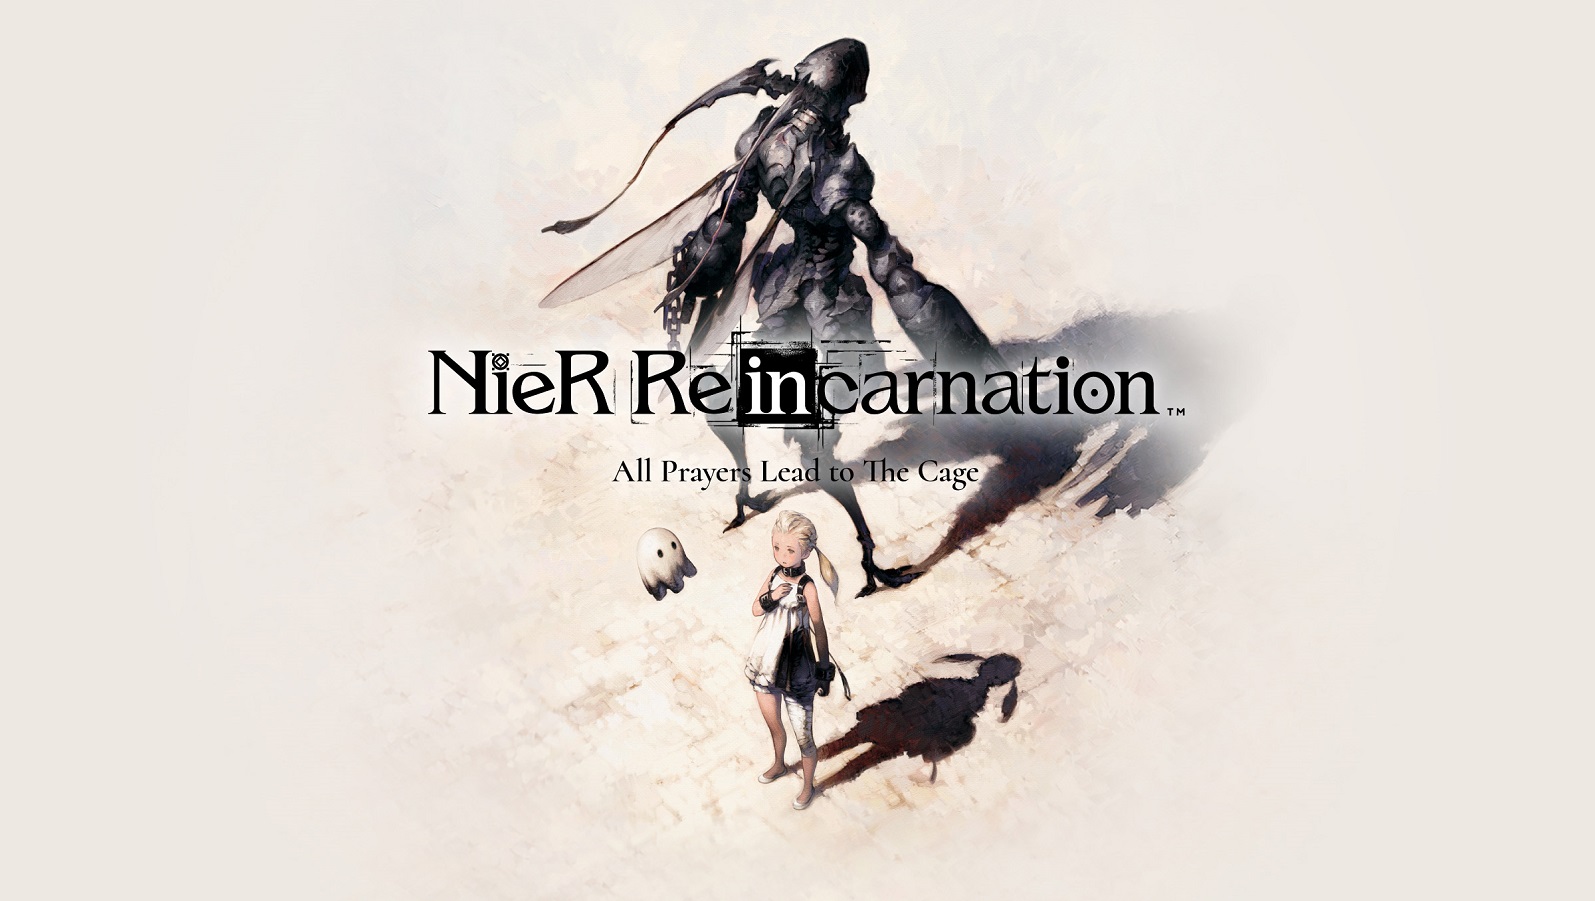 NiER Reincarnation Final Fantasy collaboration - All new characters,  events, and more